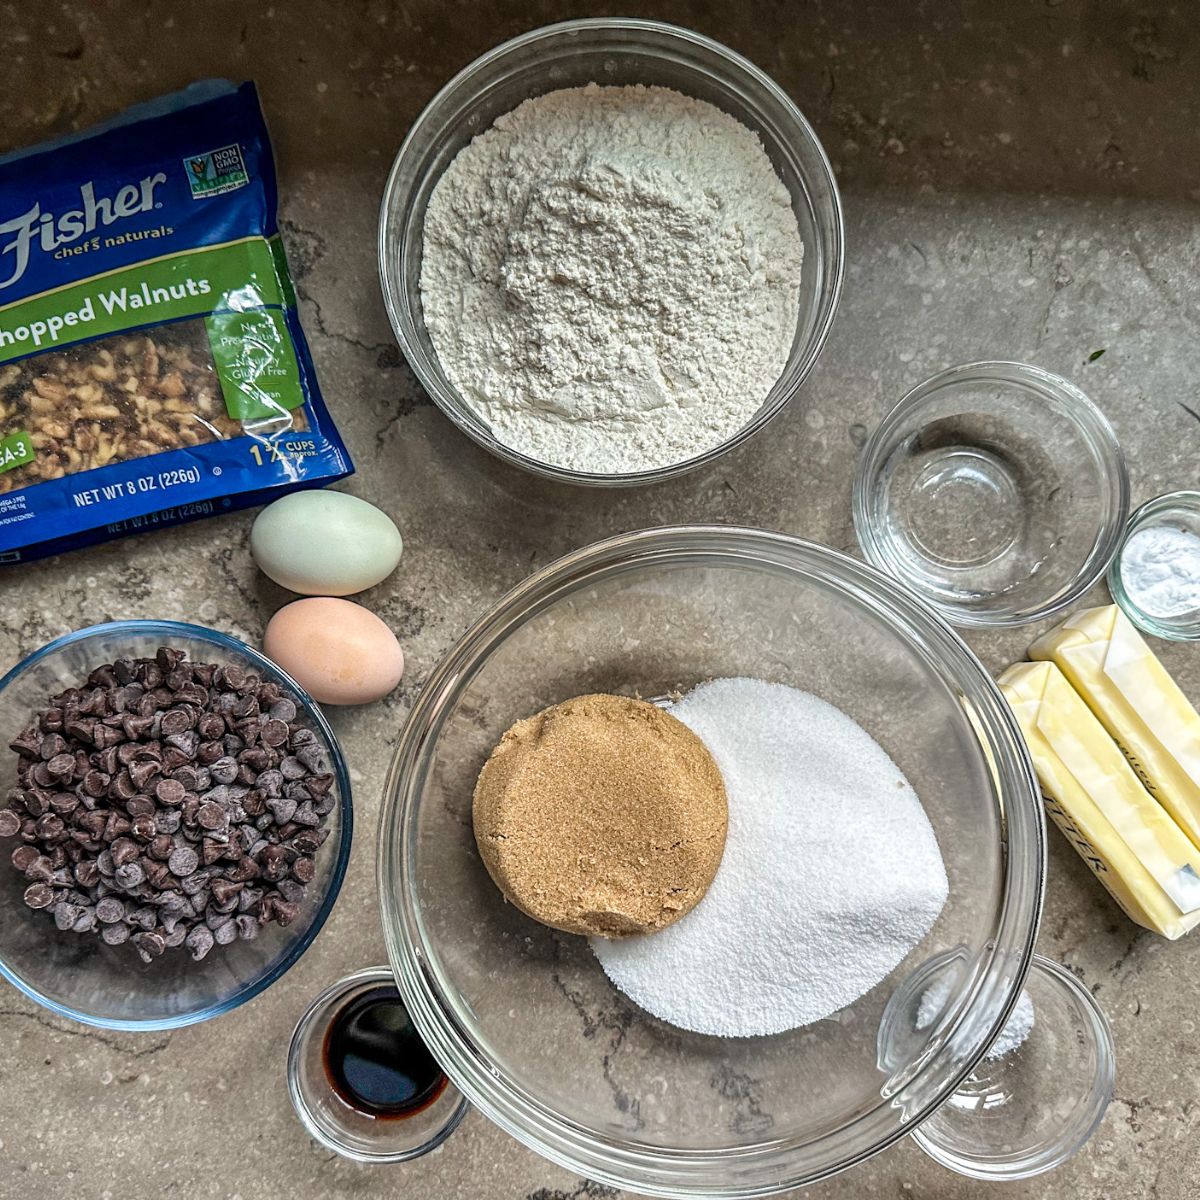 Ingredients for chocolate chip walnut cookies.